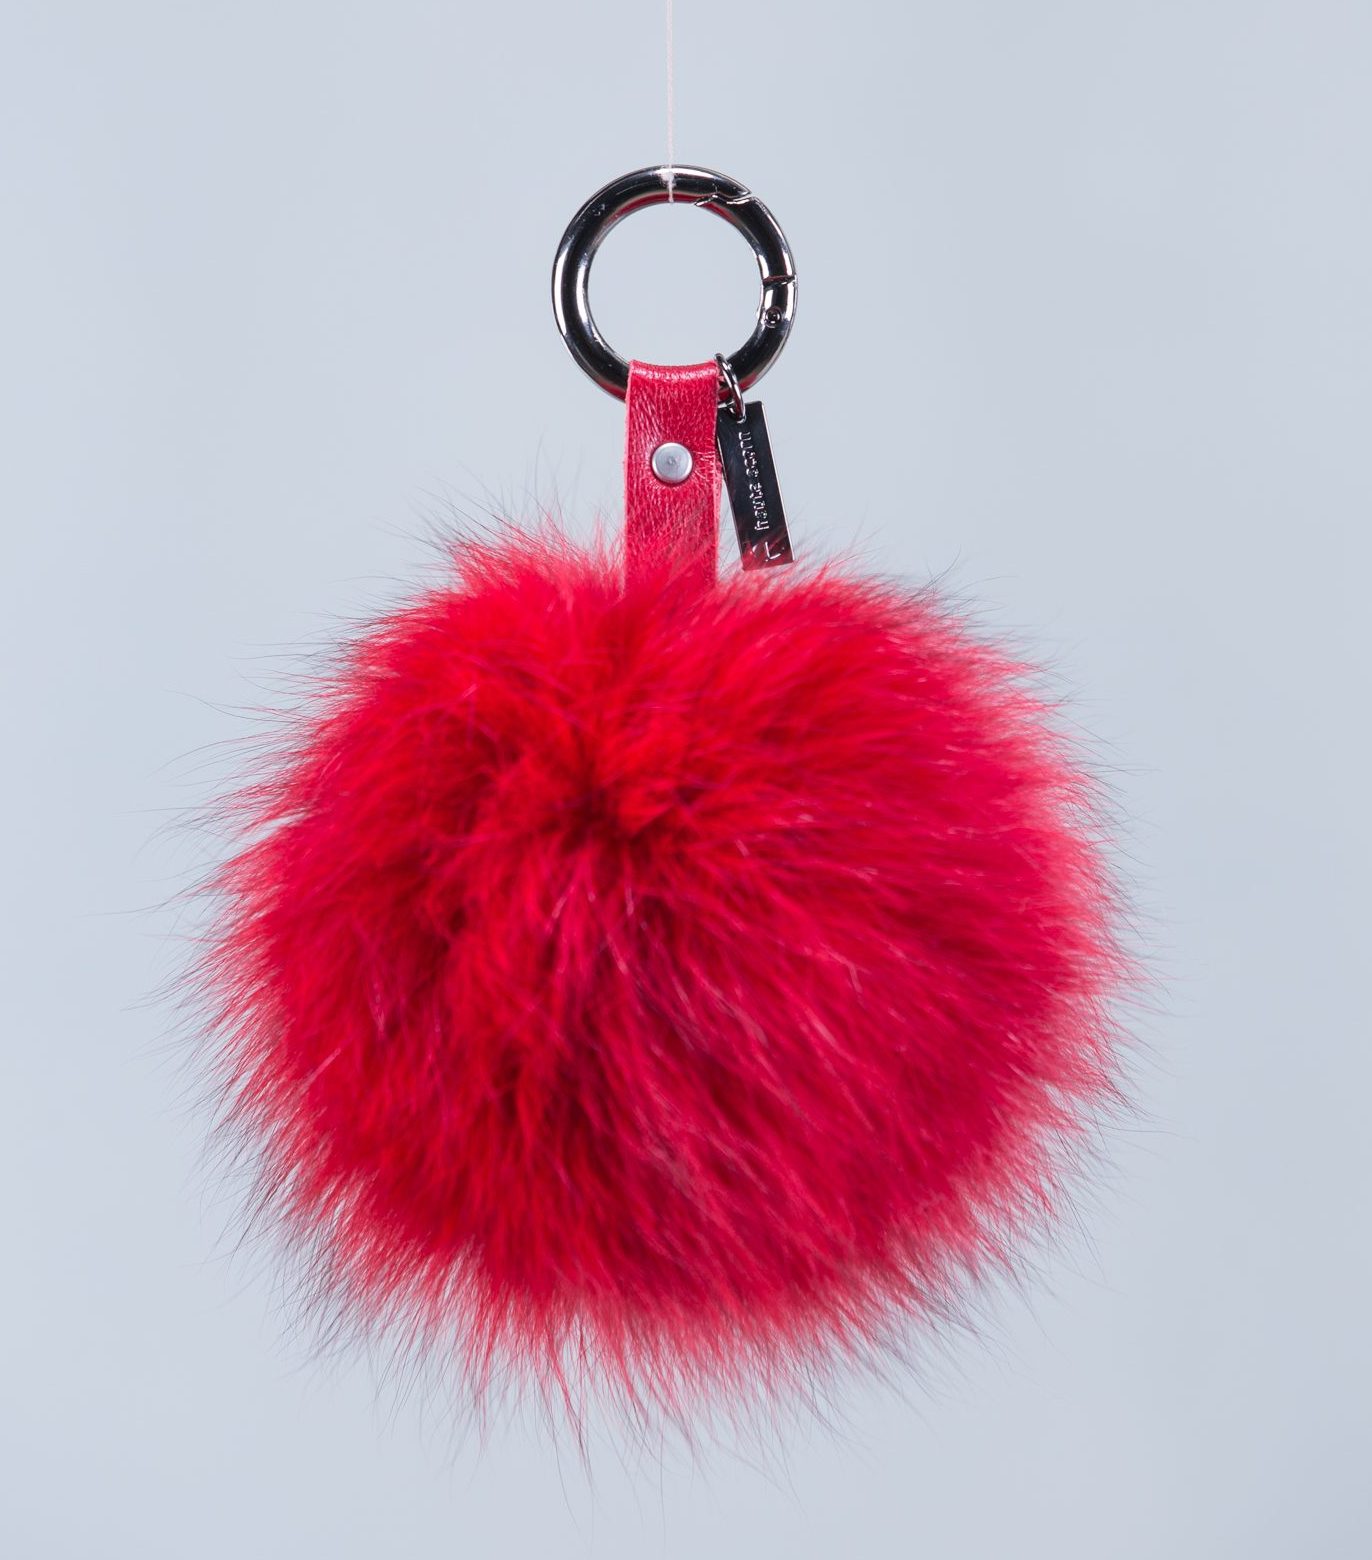 The Fluffy Red Fur Bag Charm. 100% Real Fur Keychains.